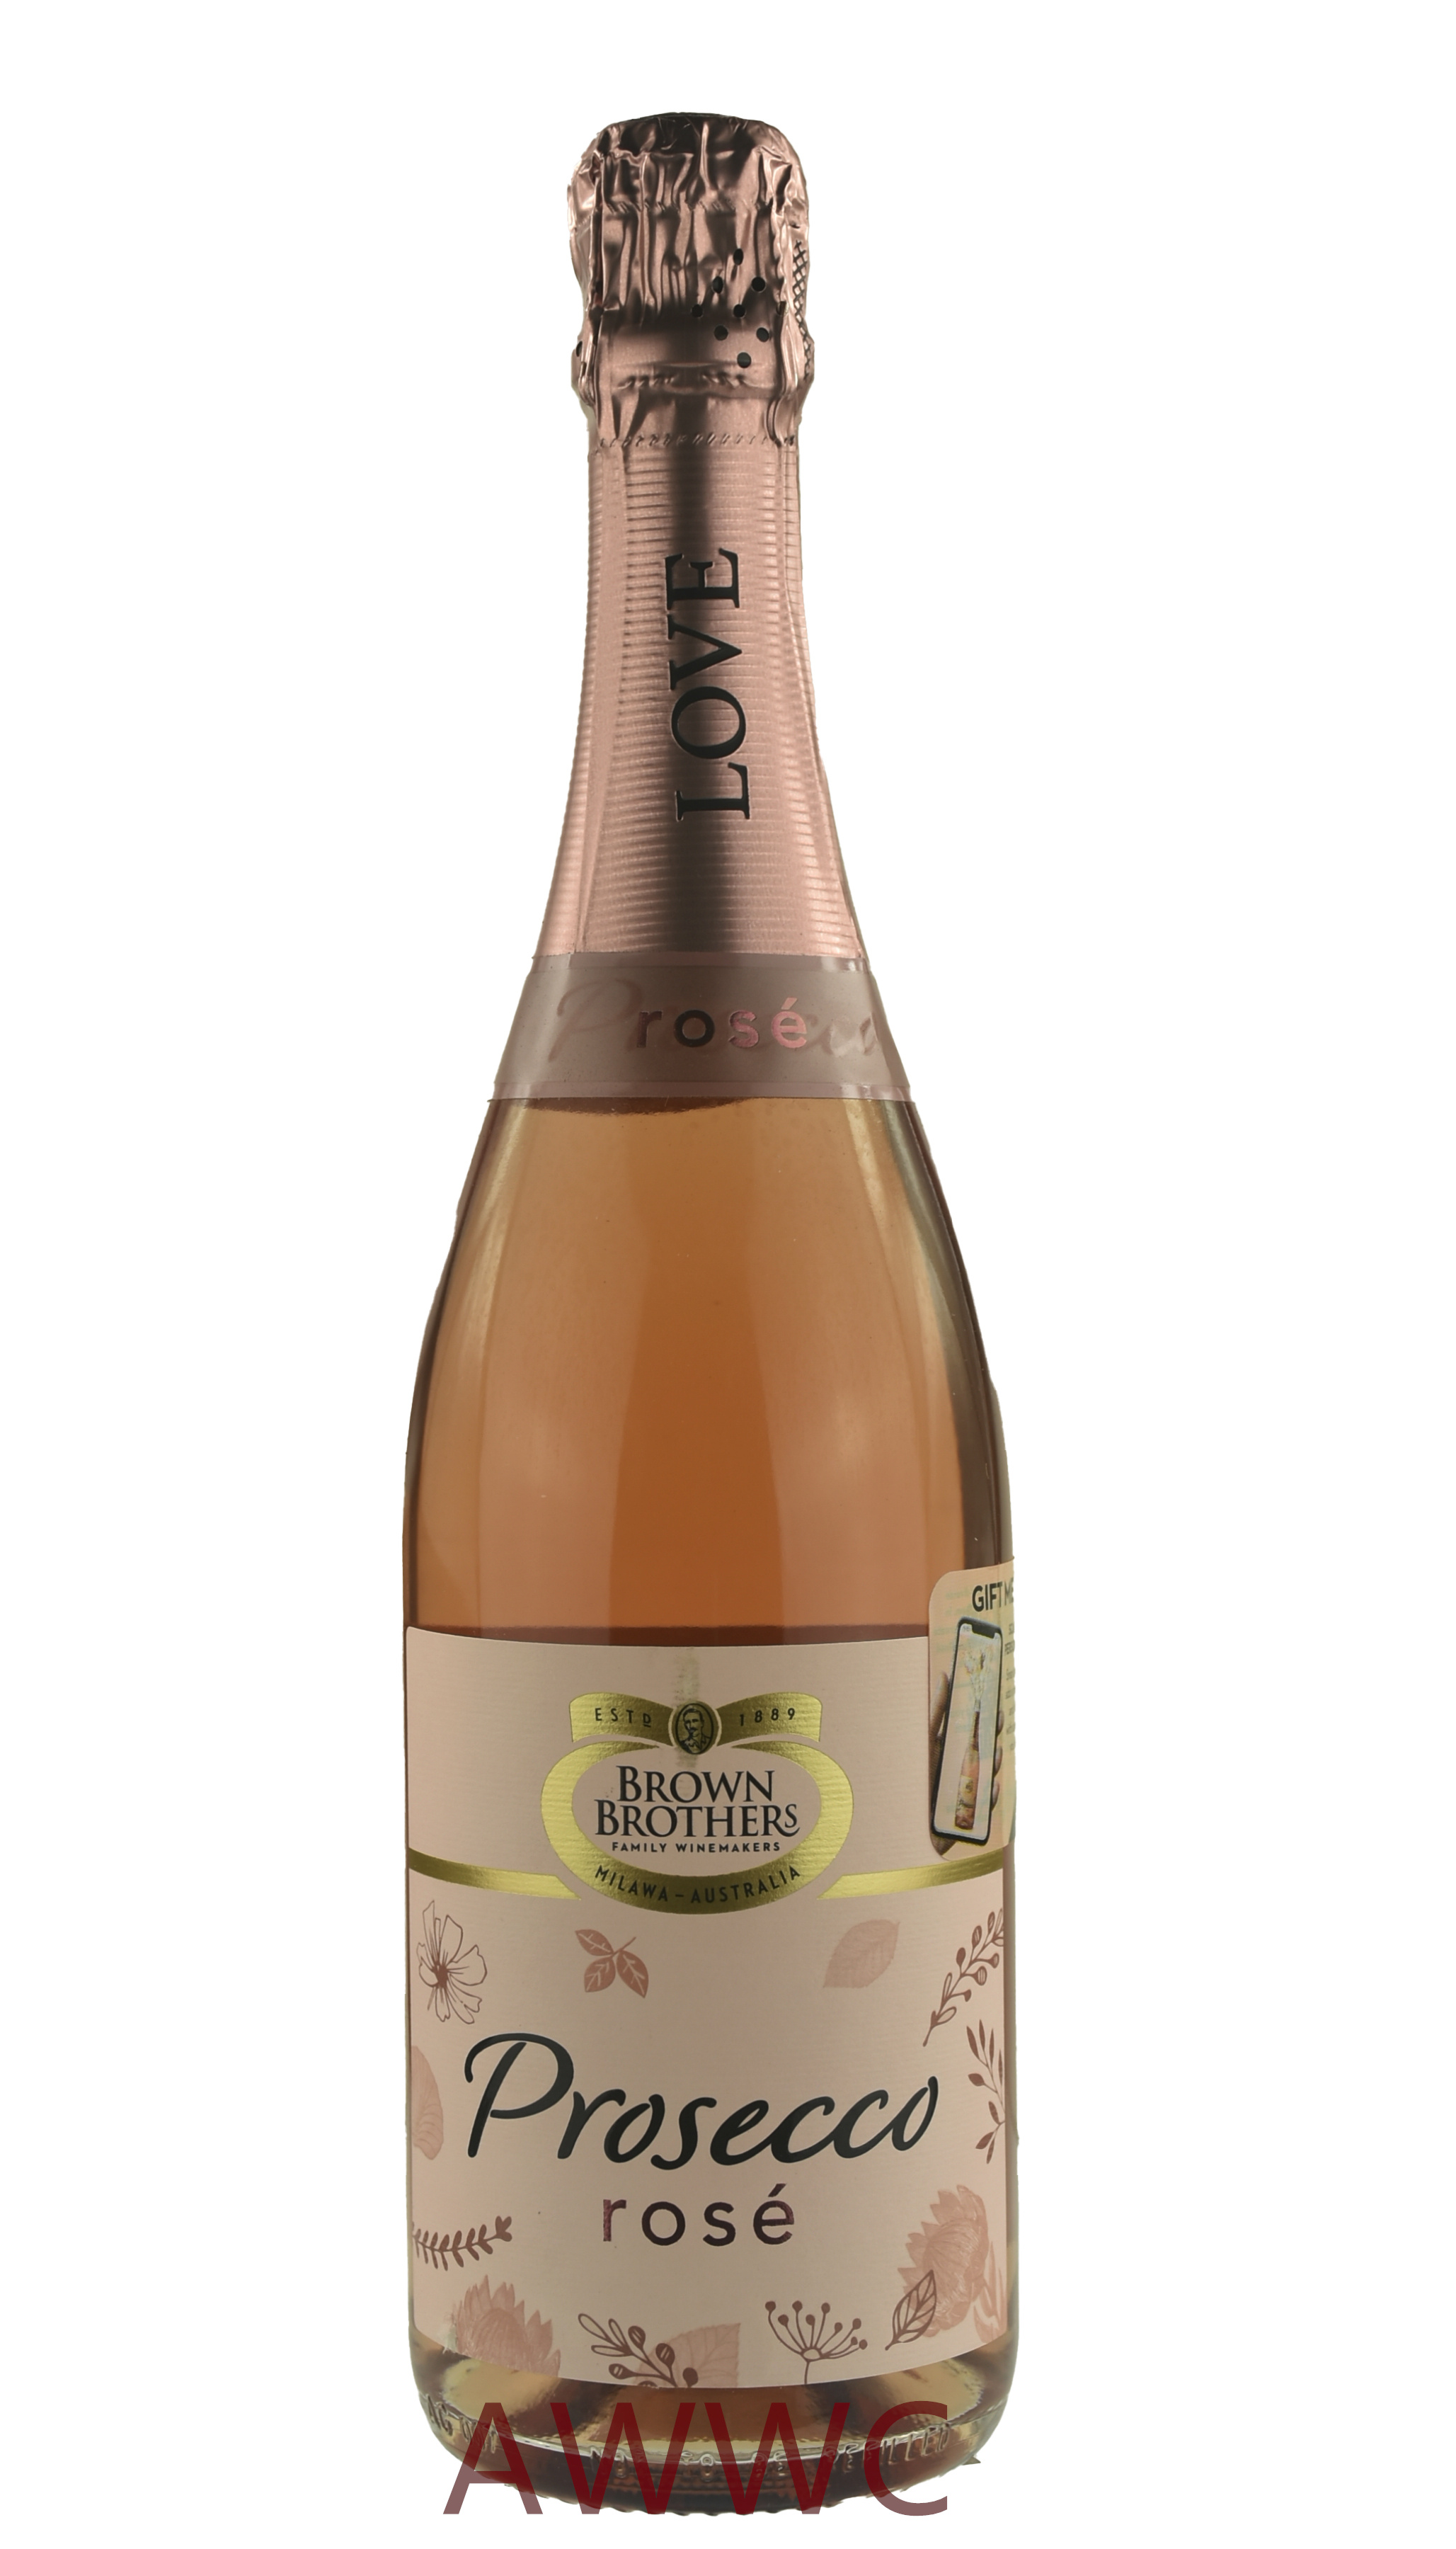 Brown Brothers Sparkling Prosecco Rose NV